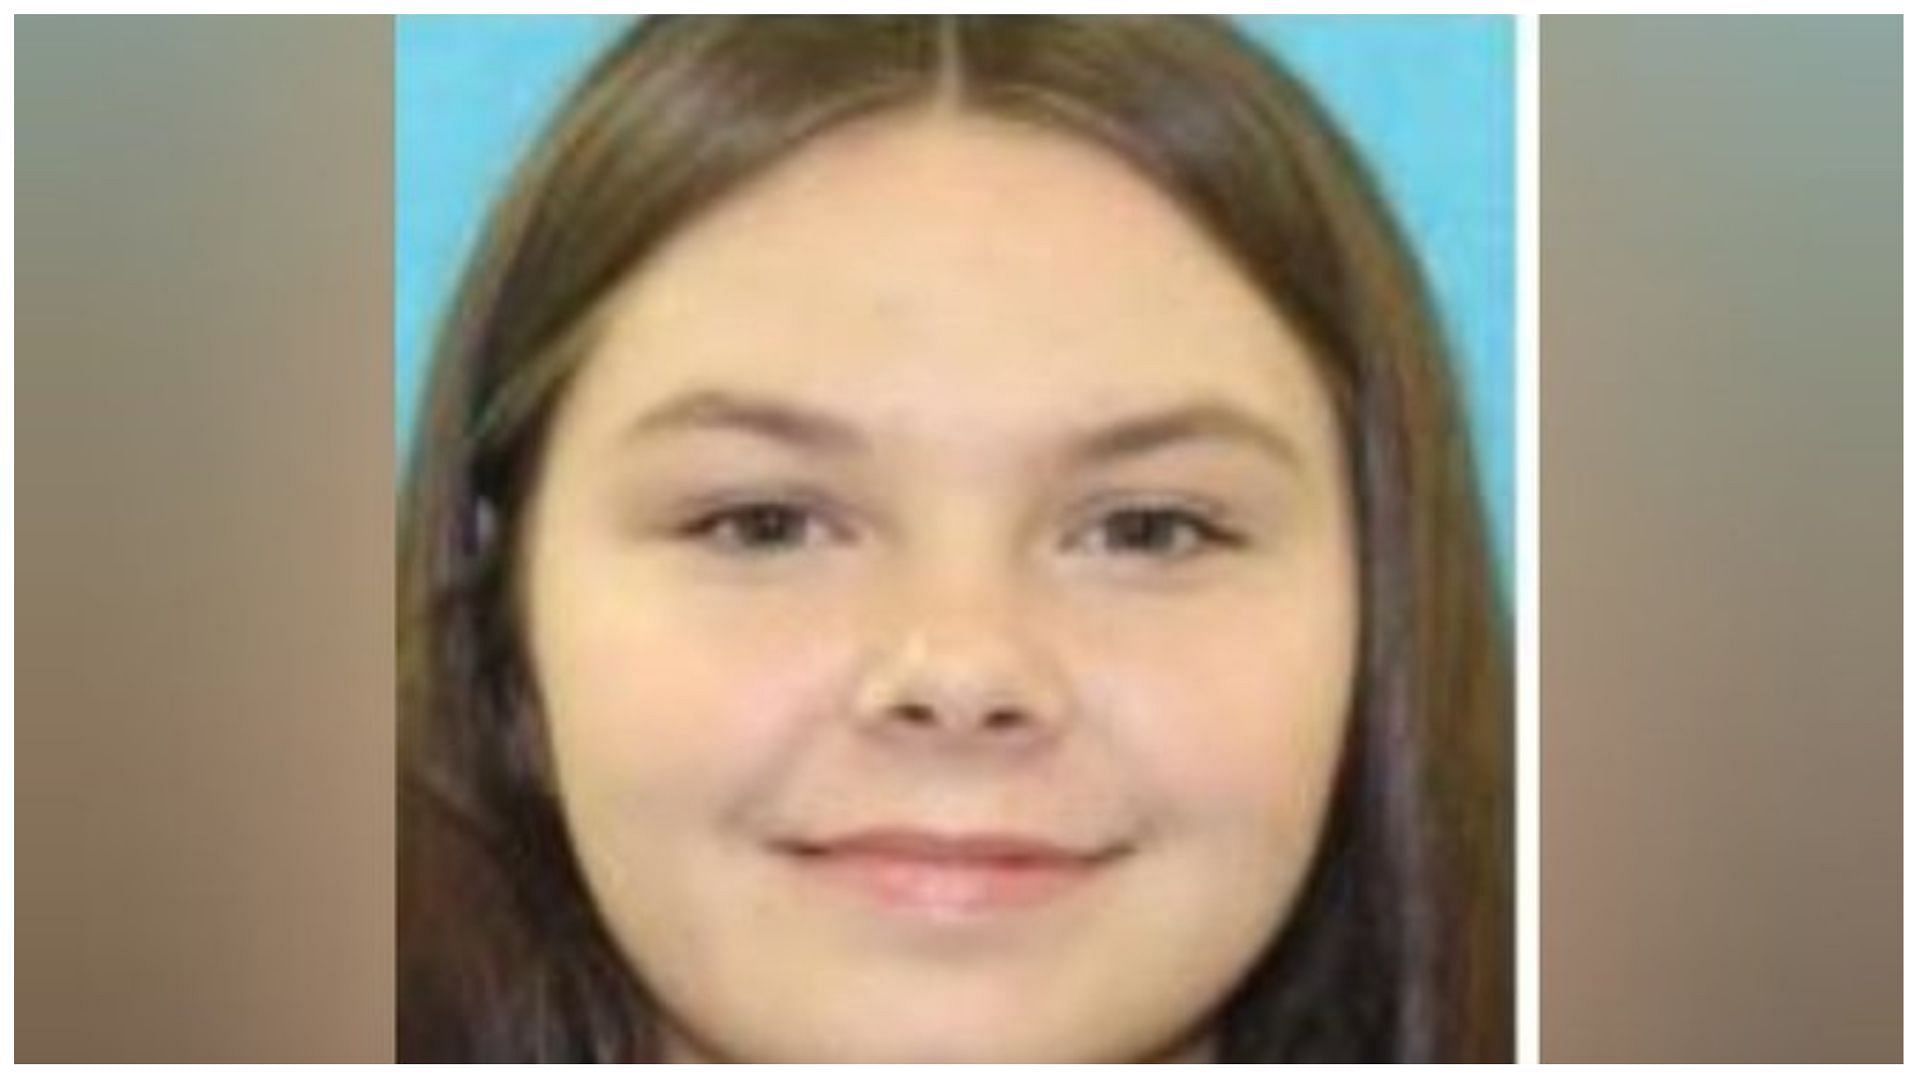 Amber Alert was discontinued as missing teen Alexis was found safe, (Image via Celina Police Department/Facebook)